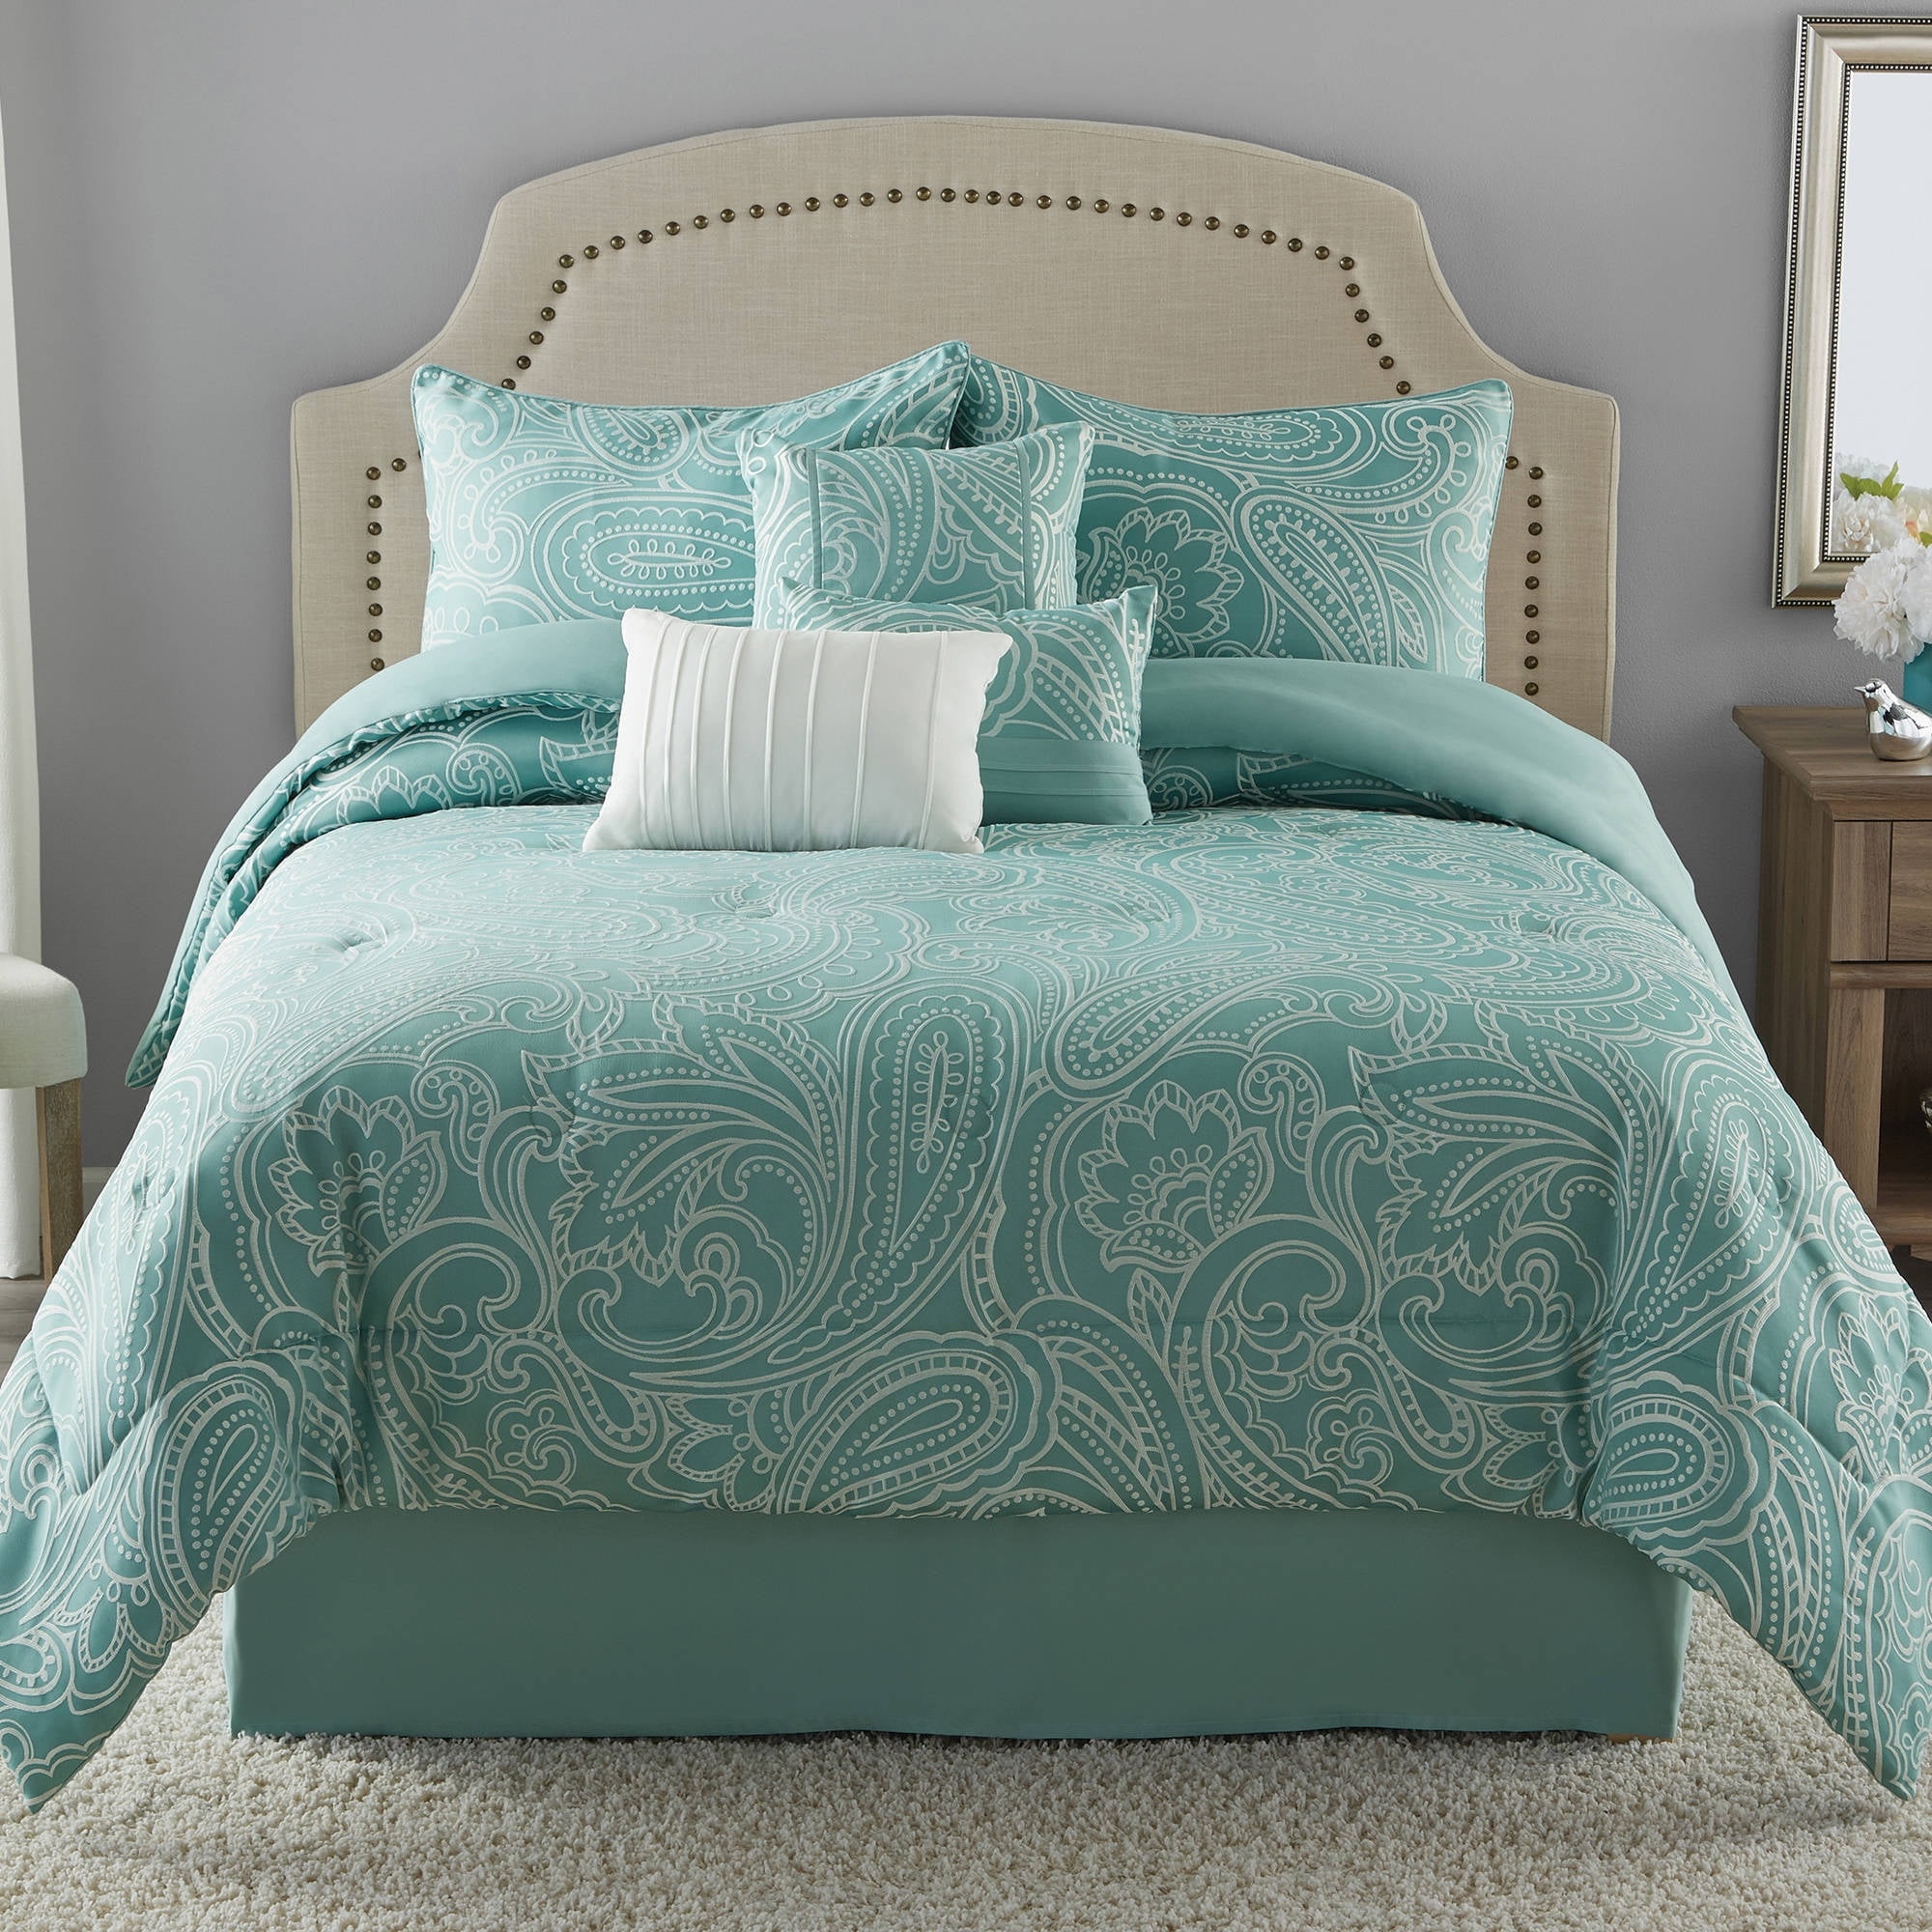 Mainstays 7 Piece Paisley Damask Comforter Set Full Queen Teal FREE FAST SHIP 